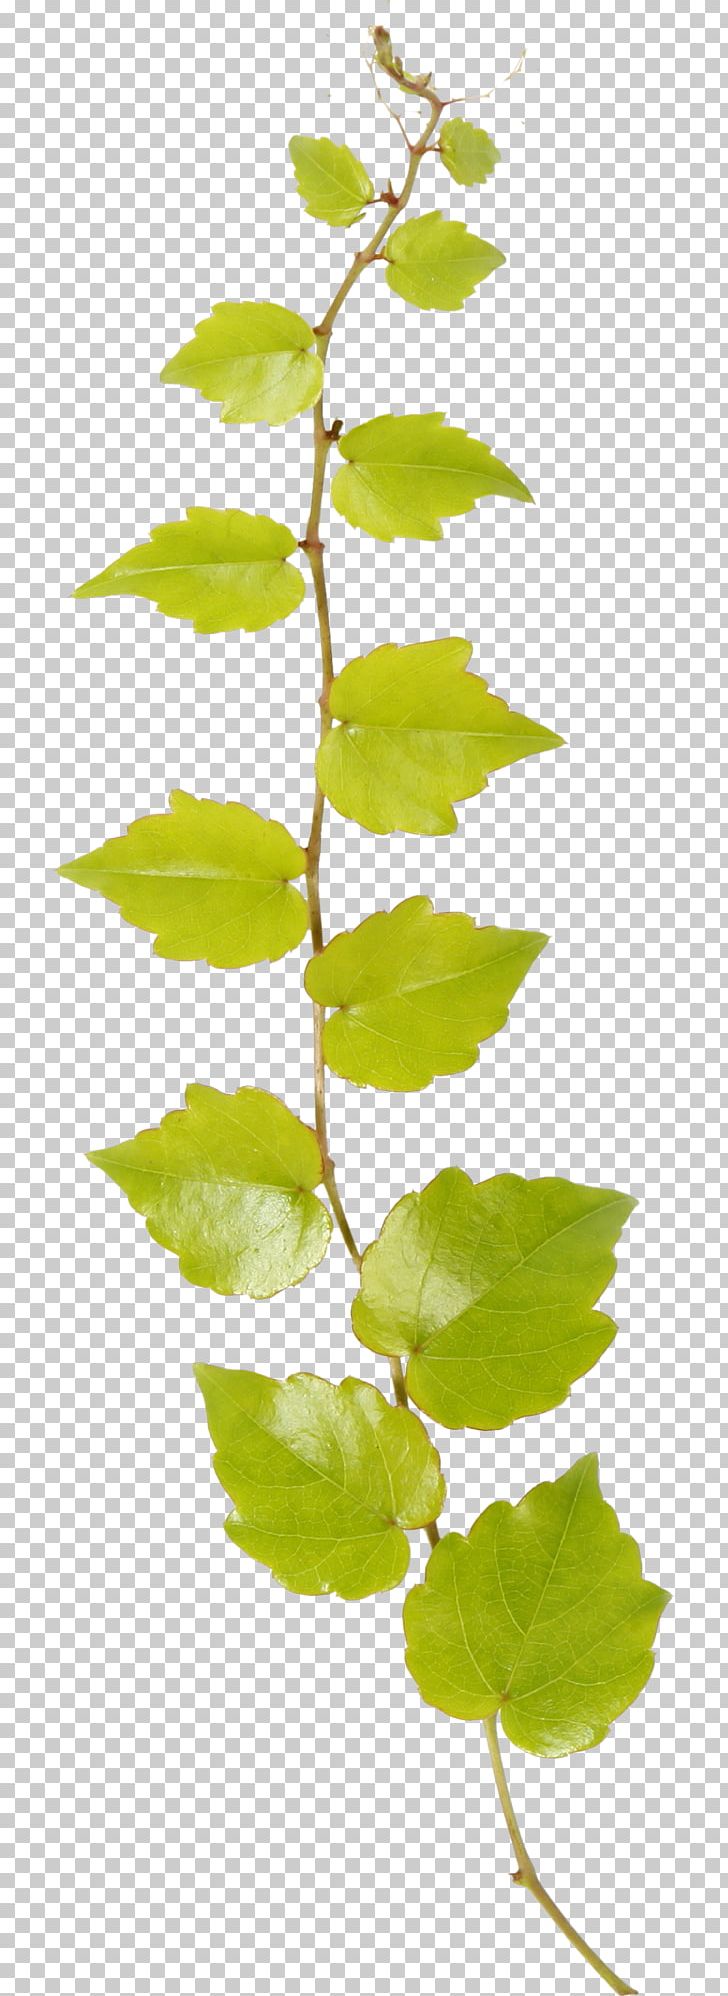 Twig Leaf PNG, Clipart, Autumn Leaves, Banana Leaves, Branch, Branches, Concerto Free PNG Download